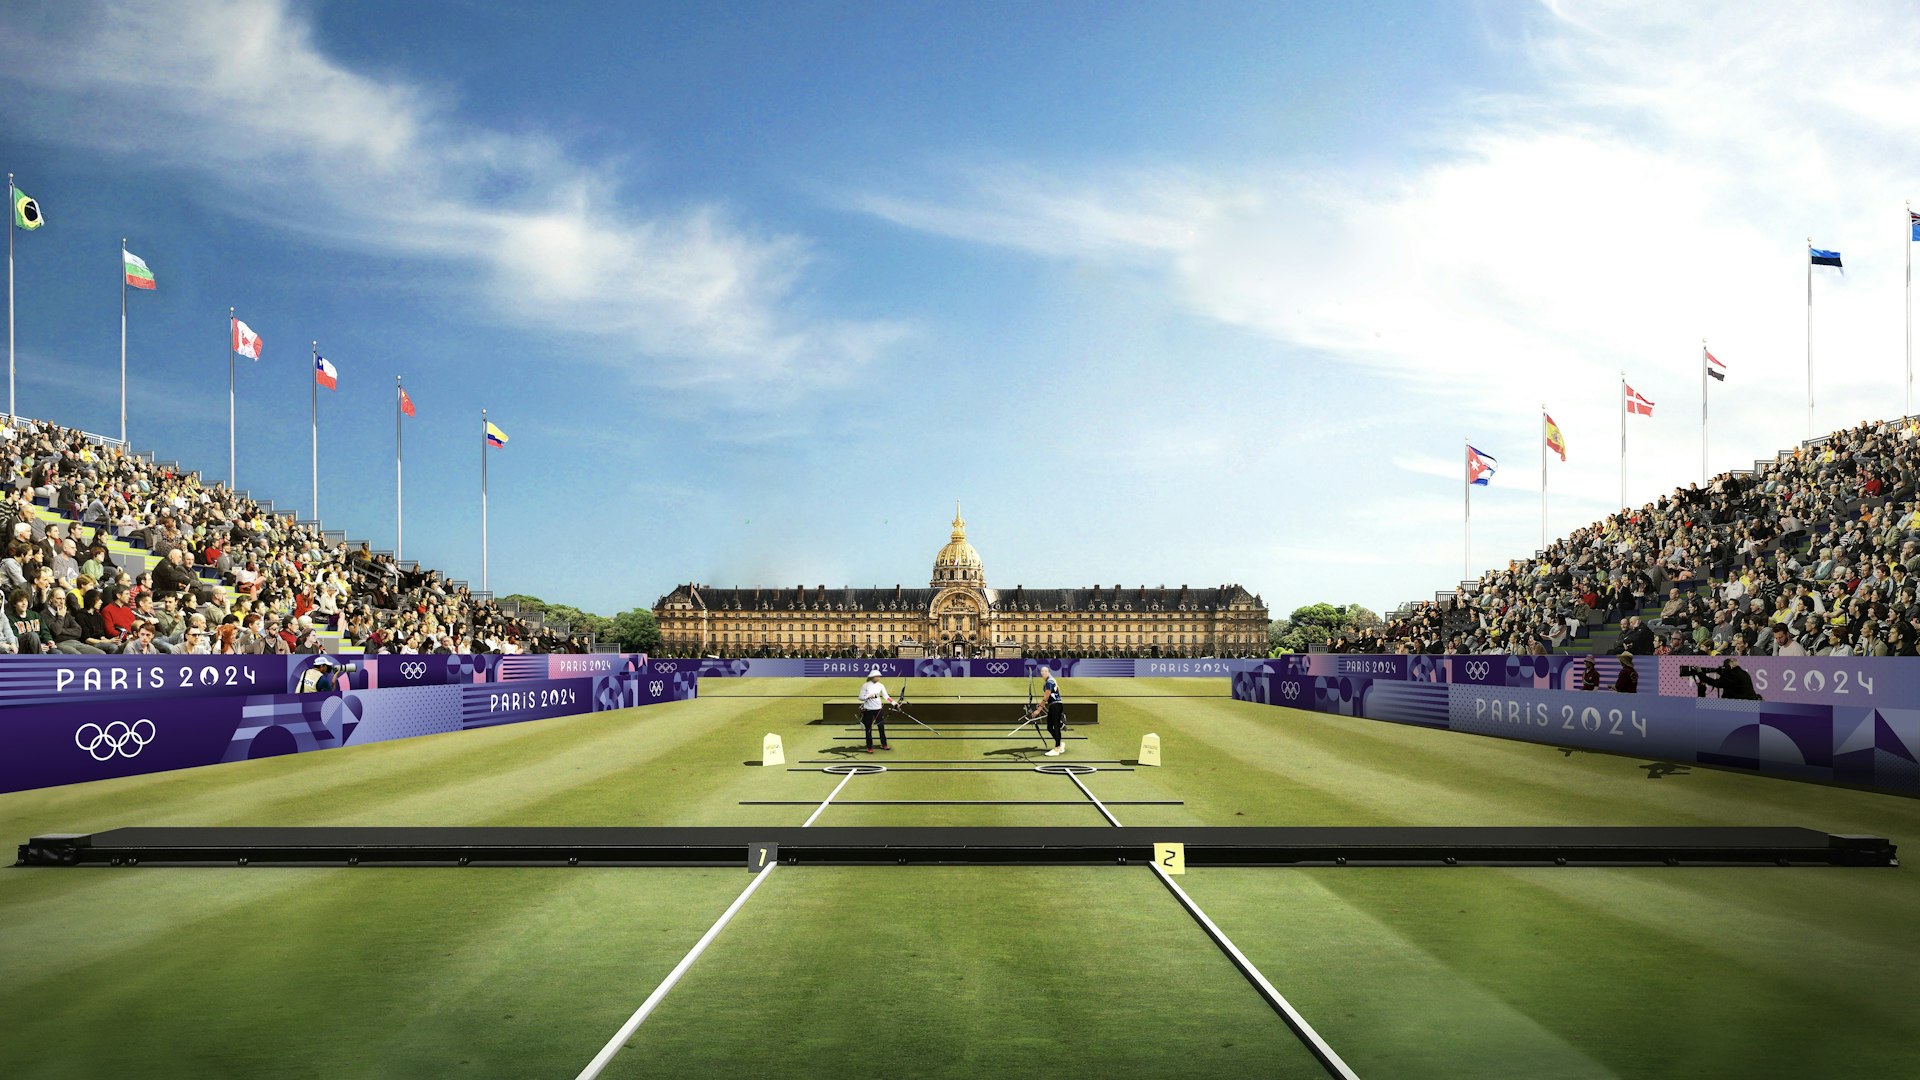 A rendering of the archery competition of the 2024 Paris Olympic Games